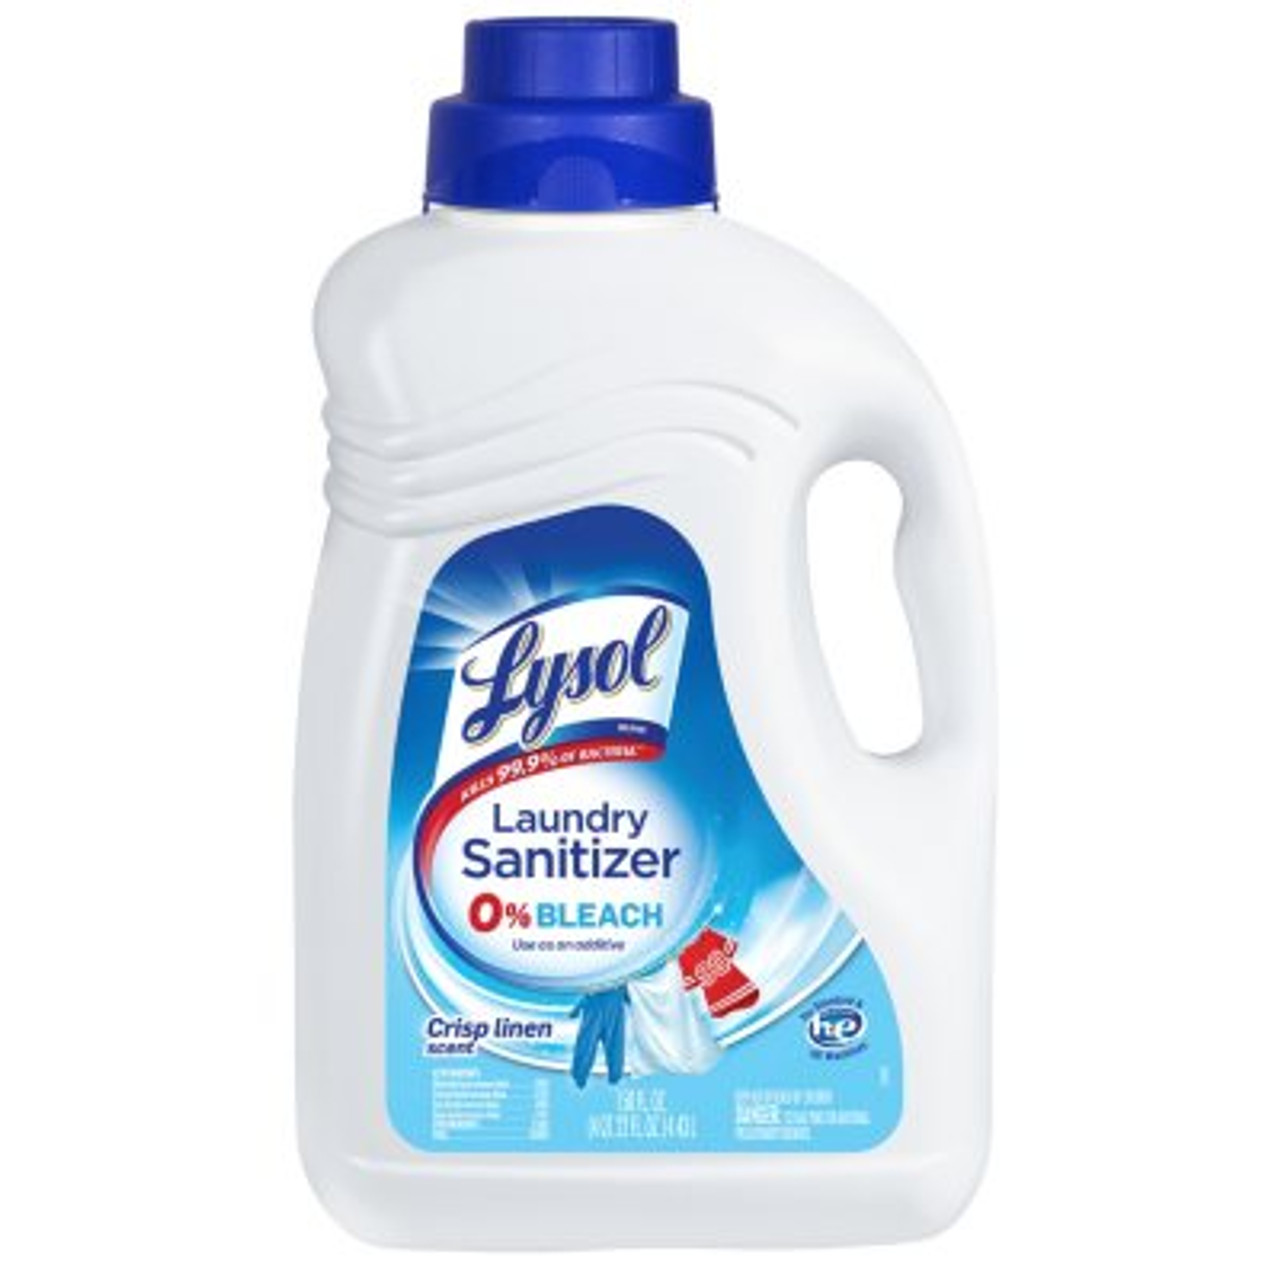 Lysol Laundry Sanitizer Additive, Crisp Linen (150 fl. oz.) - [From 71.00 - Choose pk Qty ] - *Ships from Miami